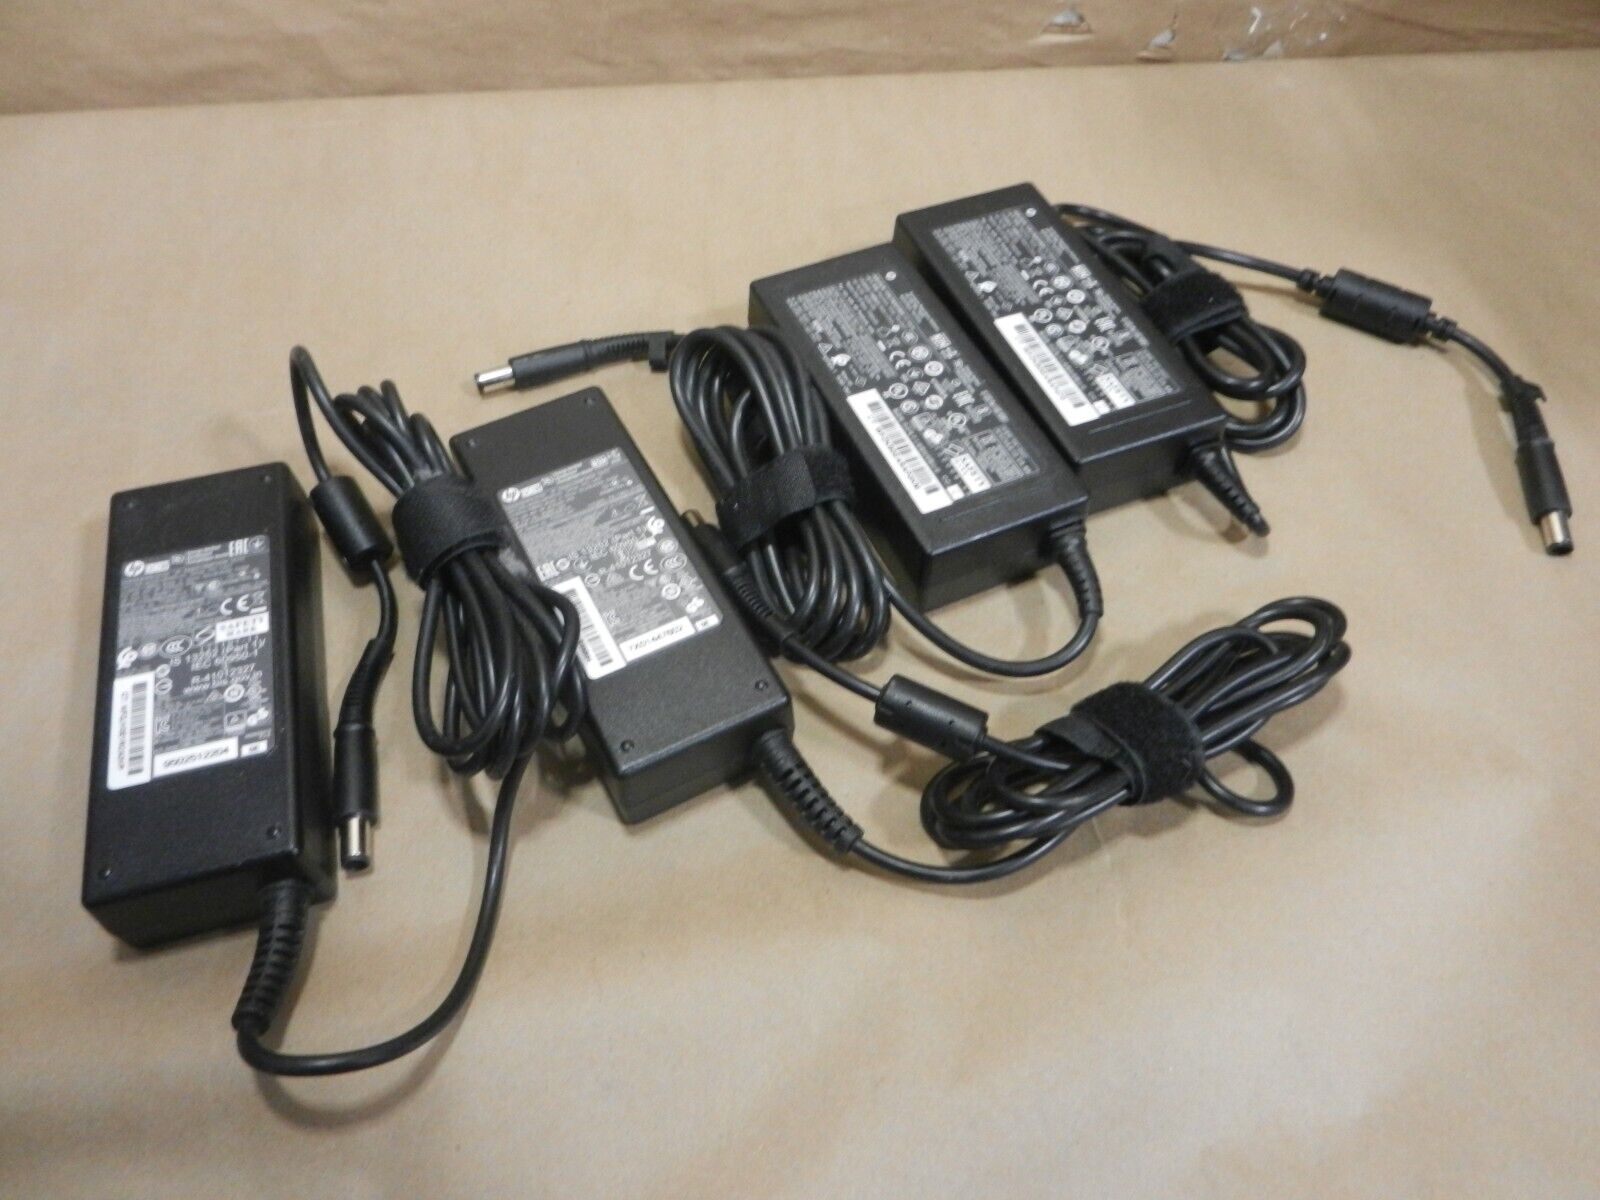 4X LOT - HP 90W 19.5V Genuine AC Adapter Laptop chargers w/ power cord